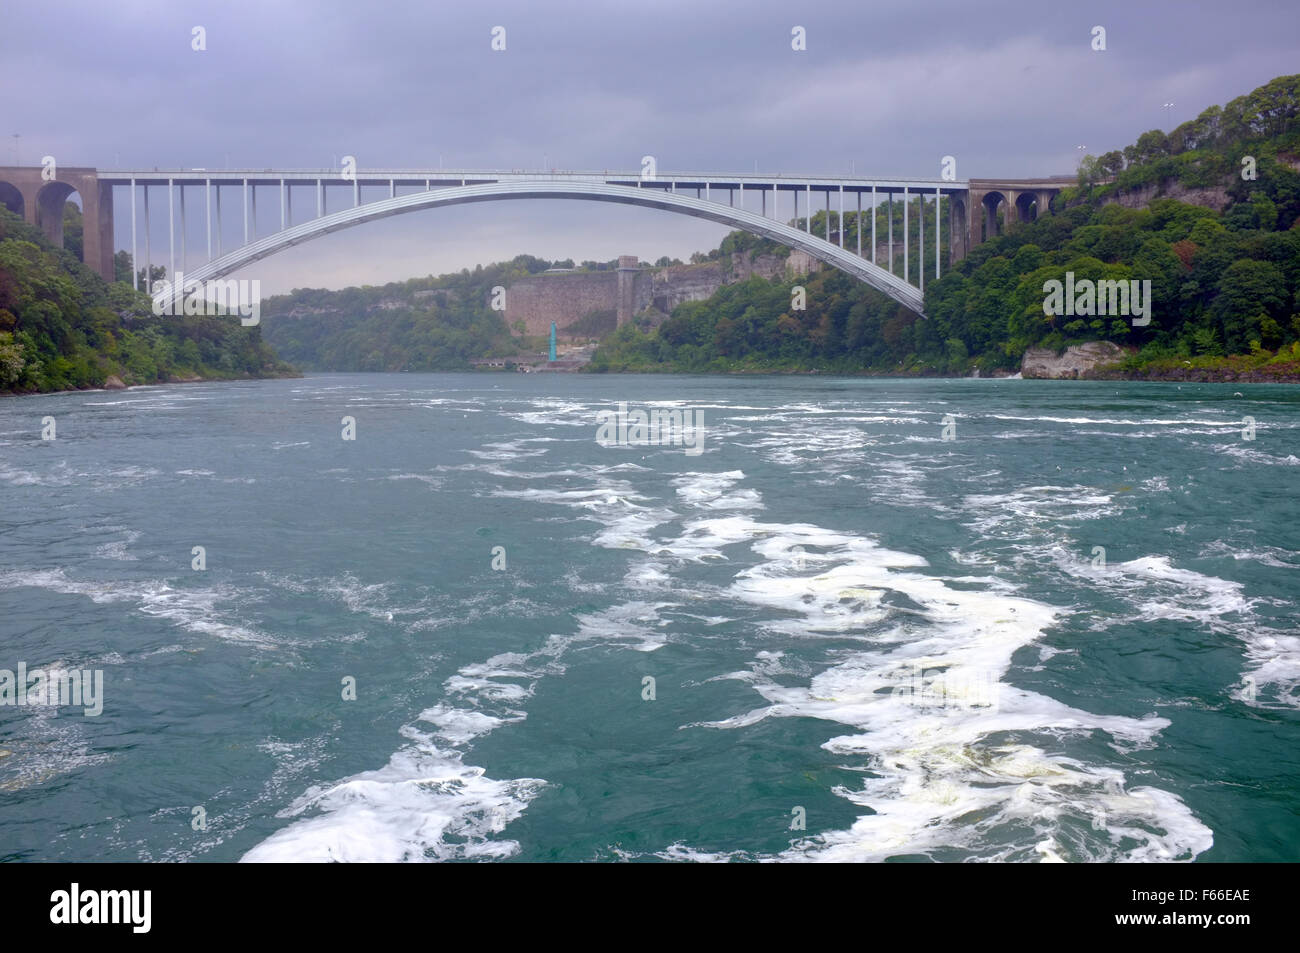 The Rainbow Bridge seen from onboard the Canadian Hornblower boat at the Niagara Falls in Ontario. Stock Photo